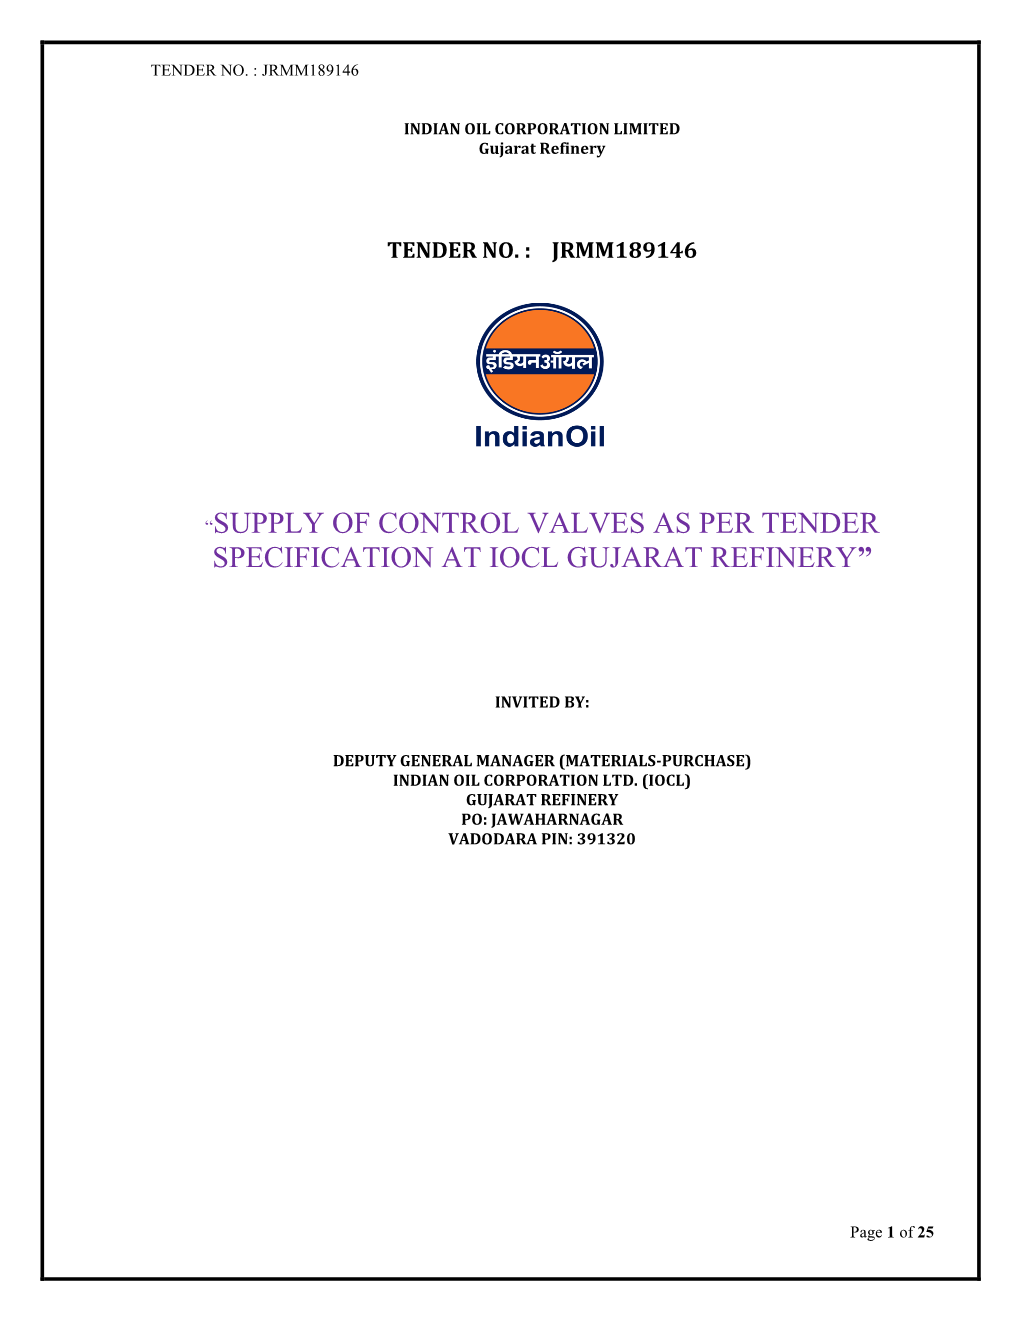 “Supply of Control Valves As Per Tender Specification at Iocl Gujarat Refinery”